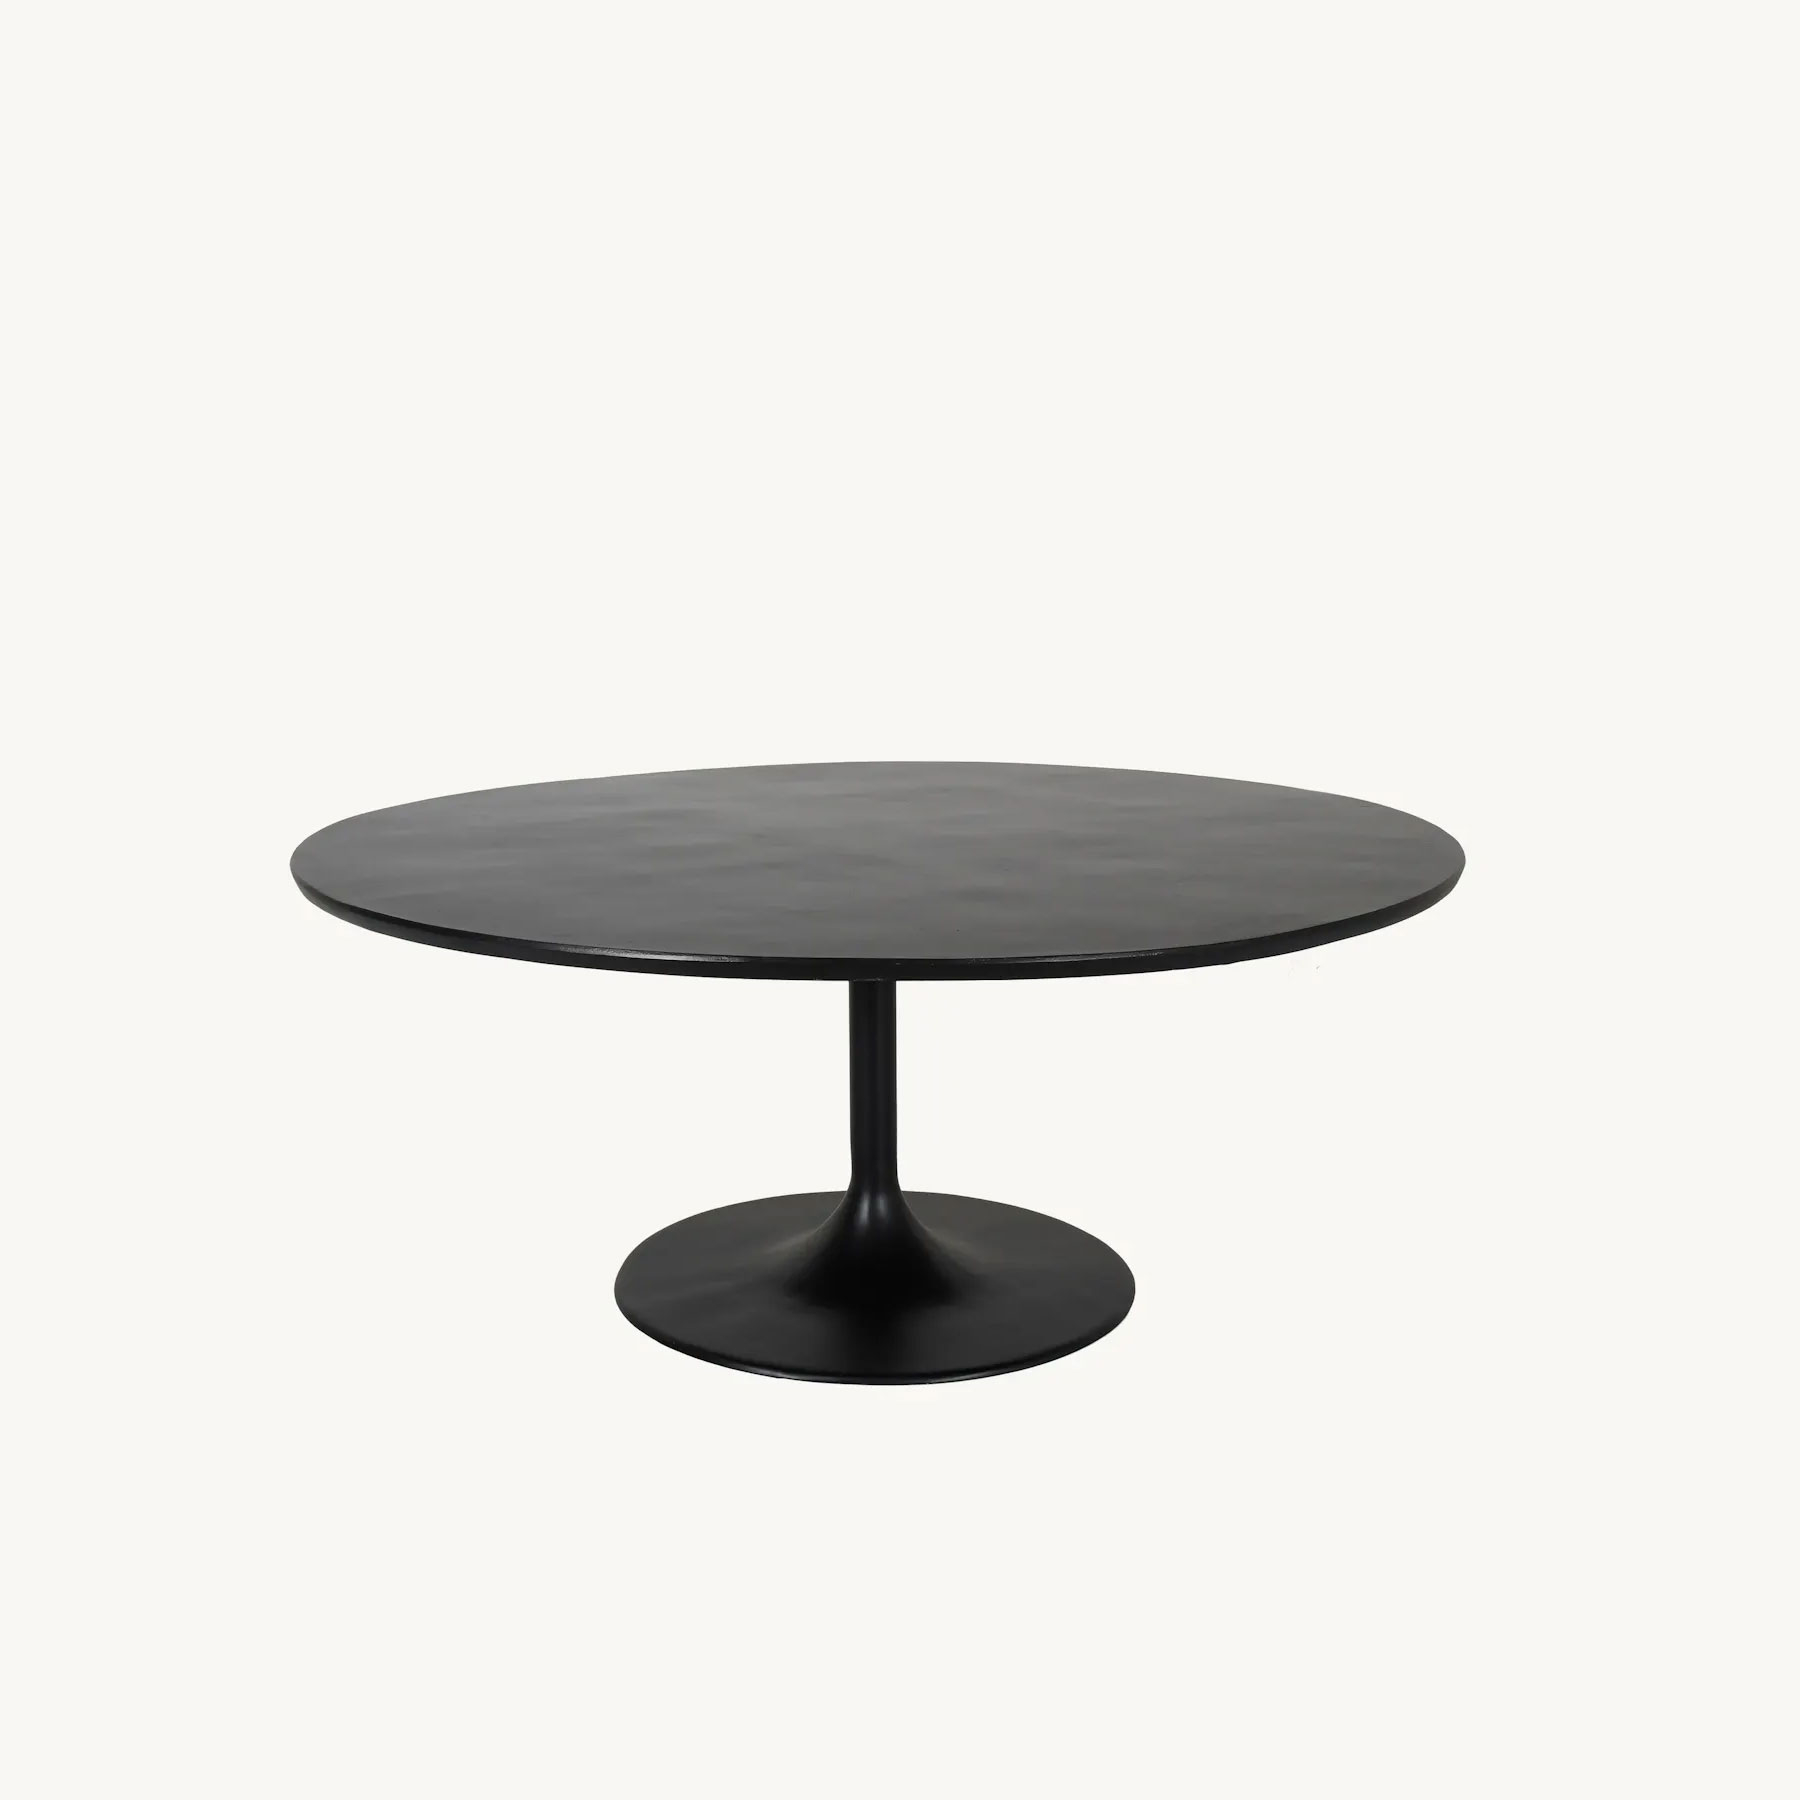 Castelle Tulip 72 inch Round Dining Table